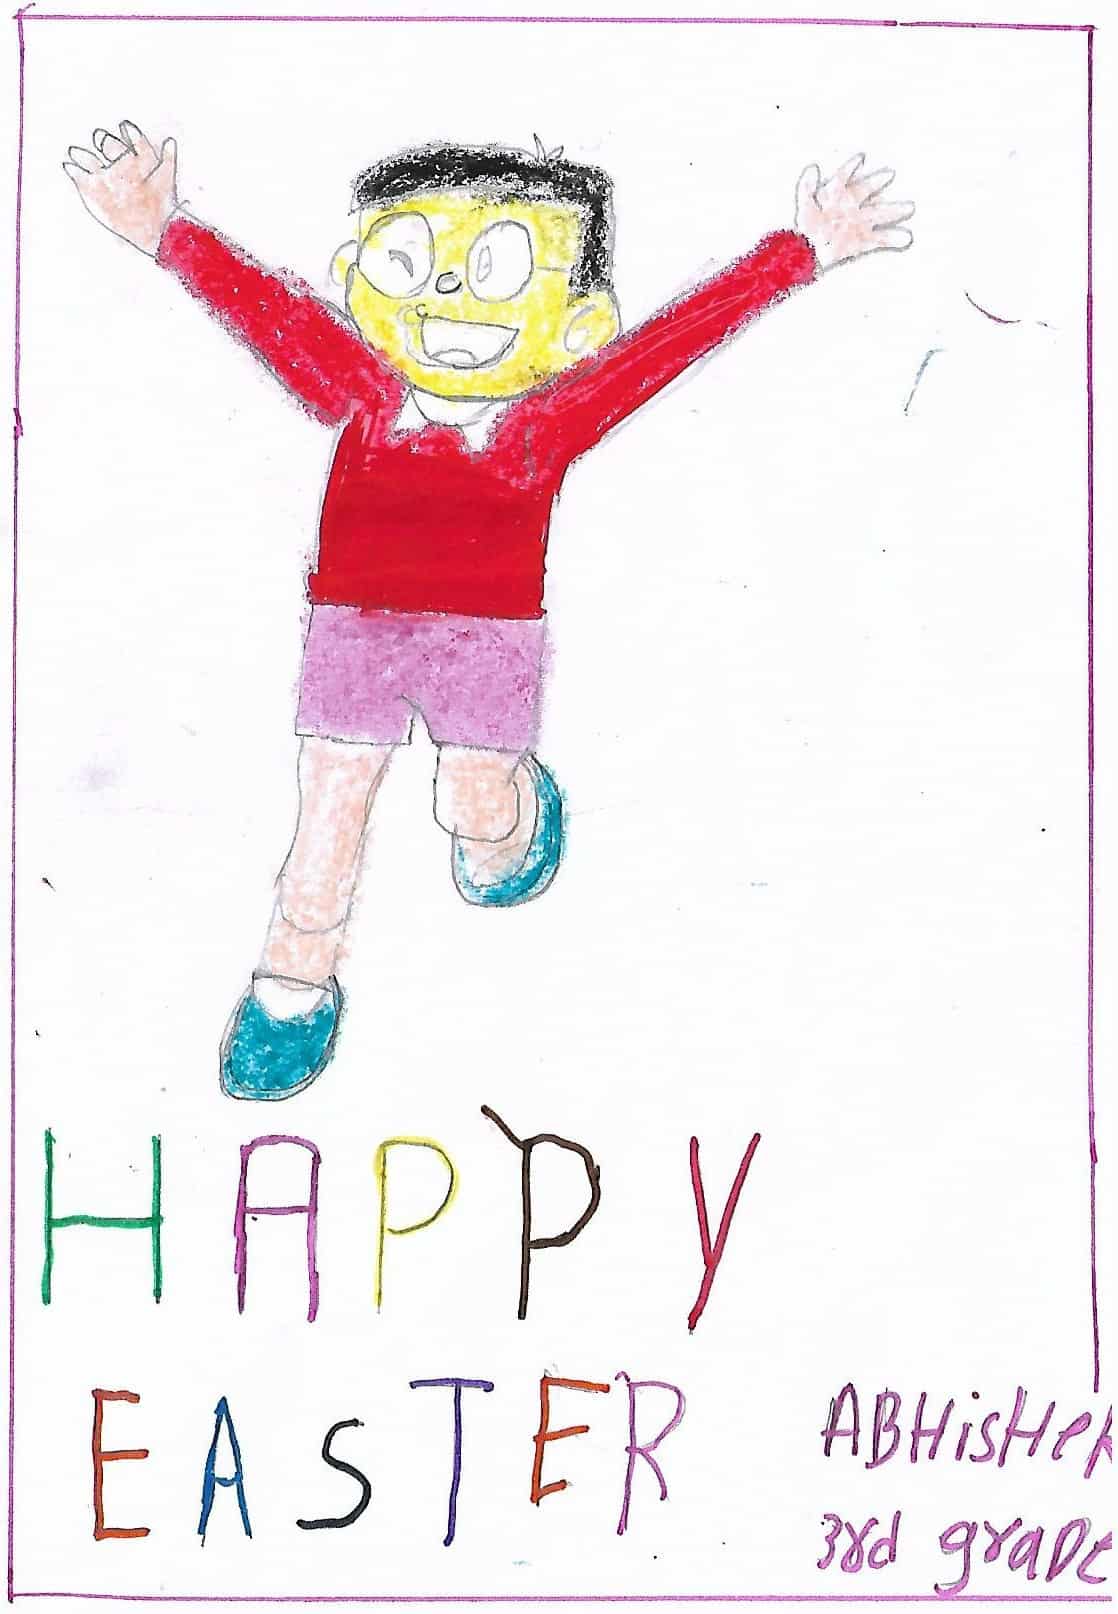 Joyful drawing by a child in India wishing Happy Easter